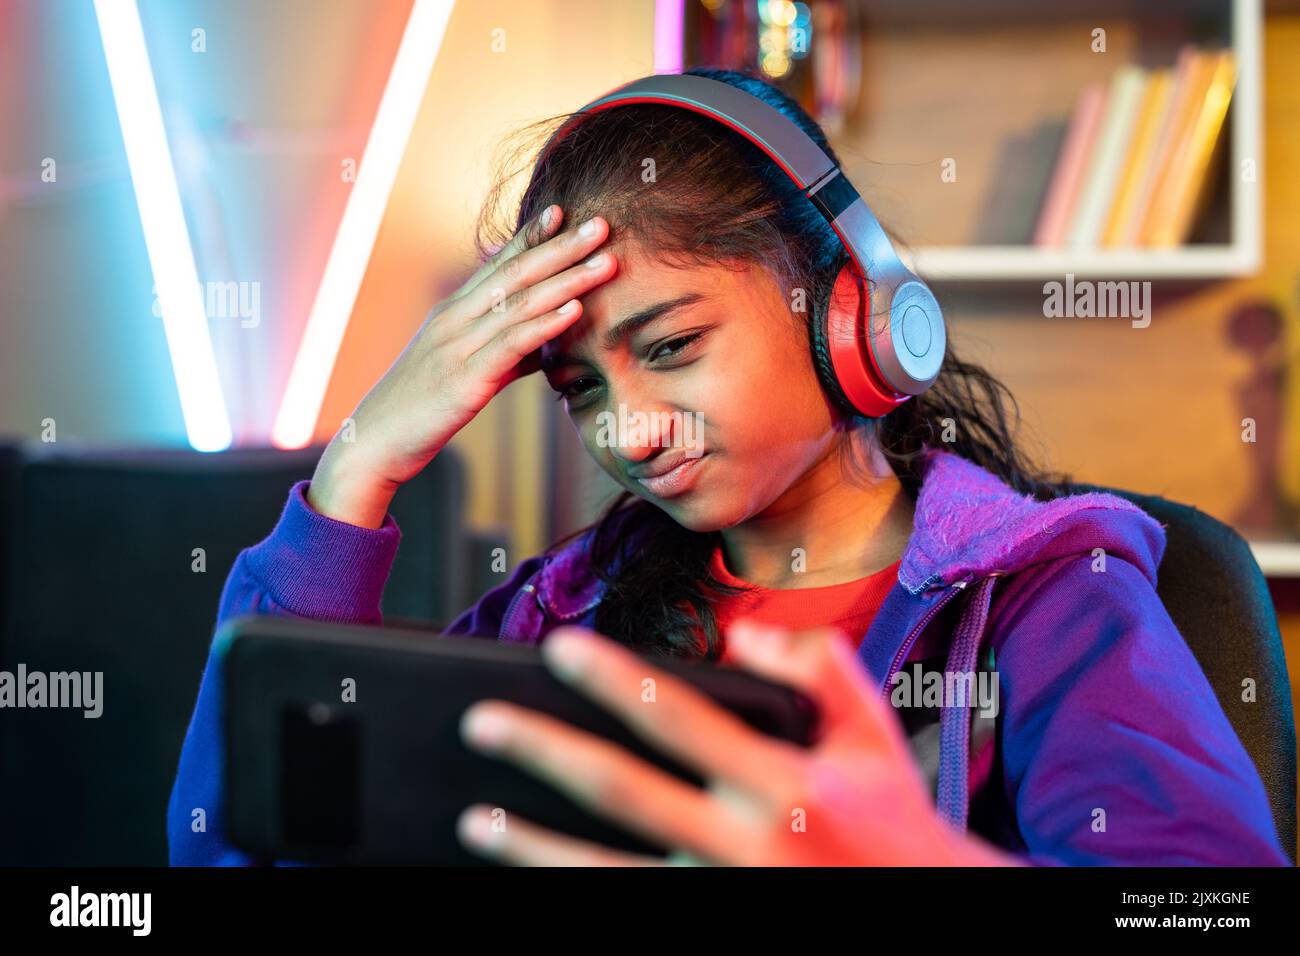 Sad girl with headphones losing game while playing video game on mobile phone at home - concept of competition, technology and entertainment Stock Photo